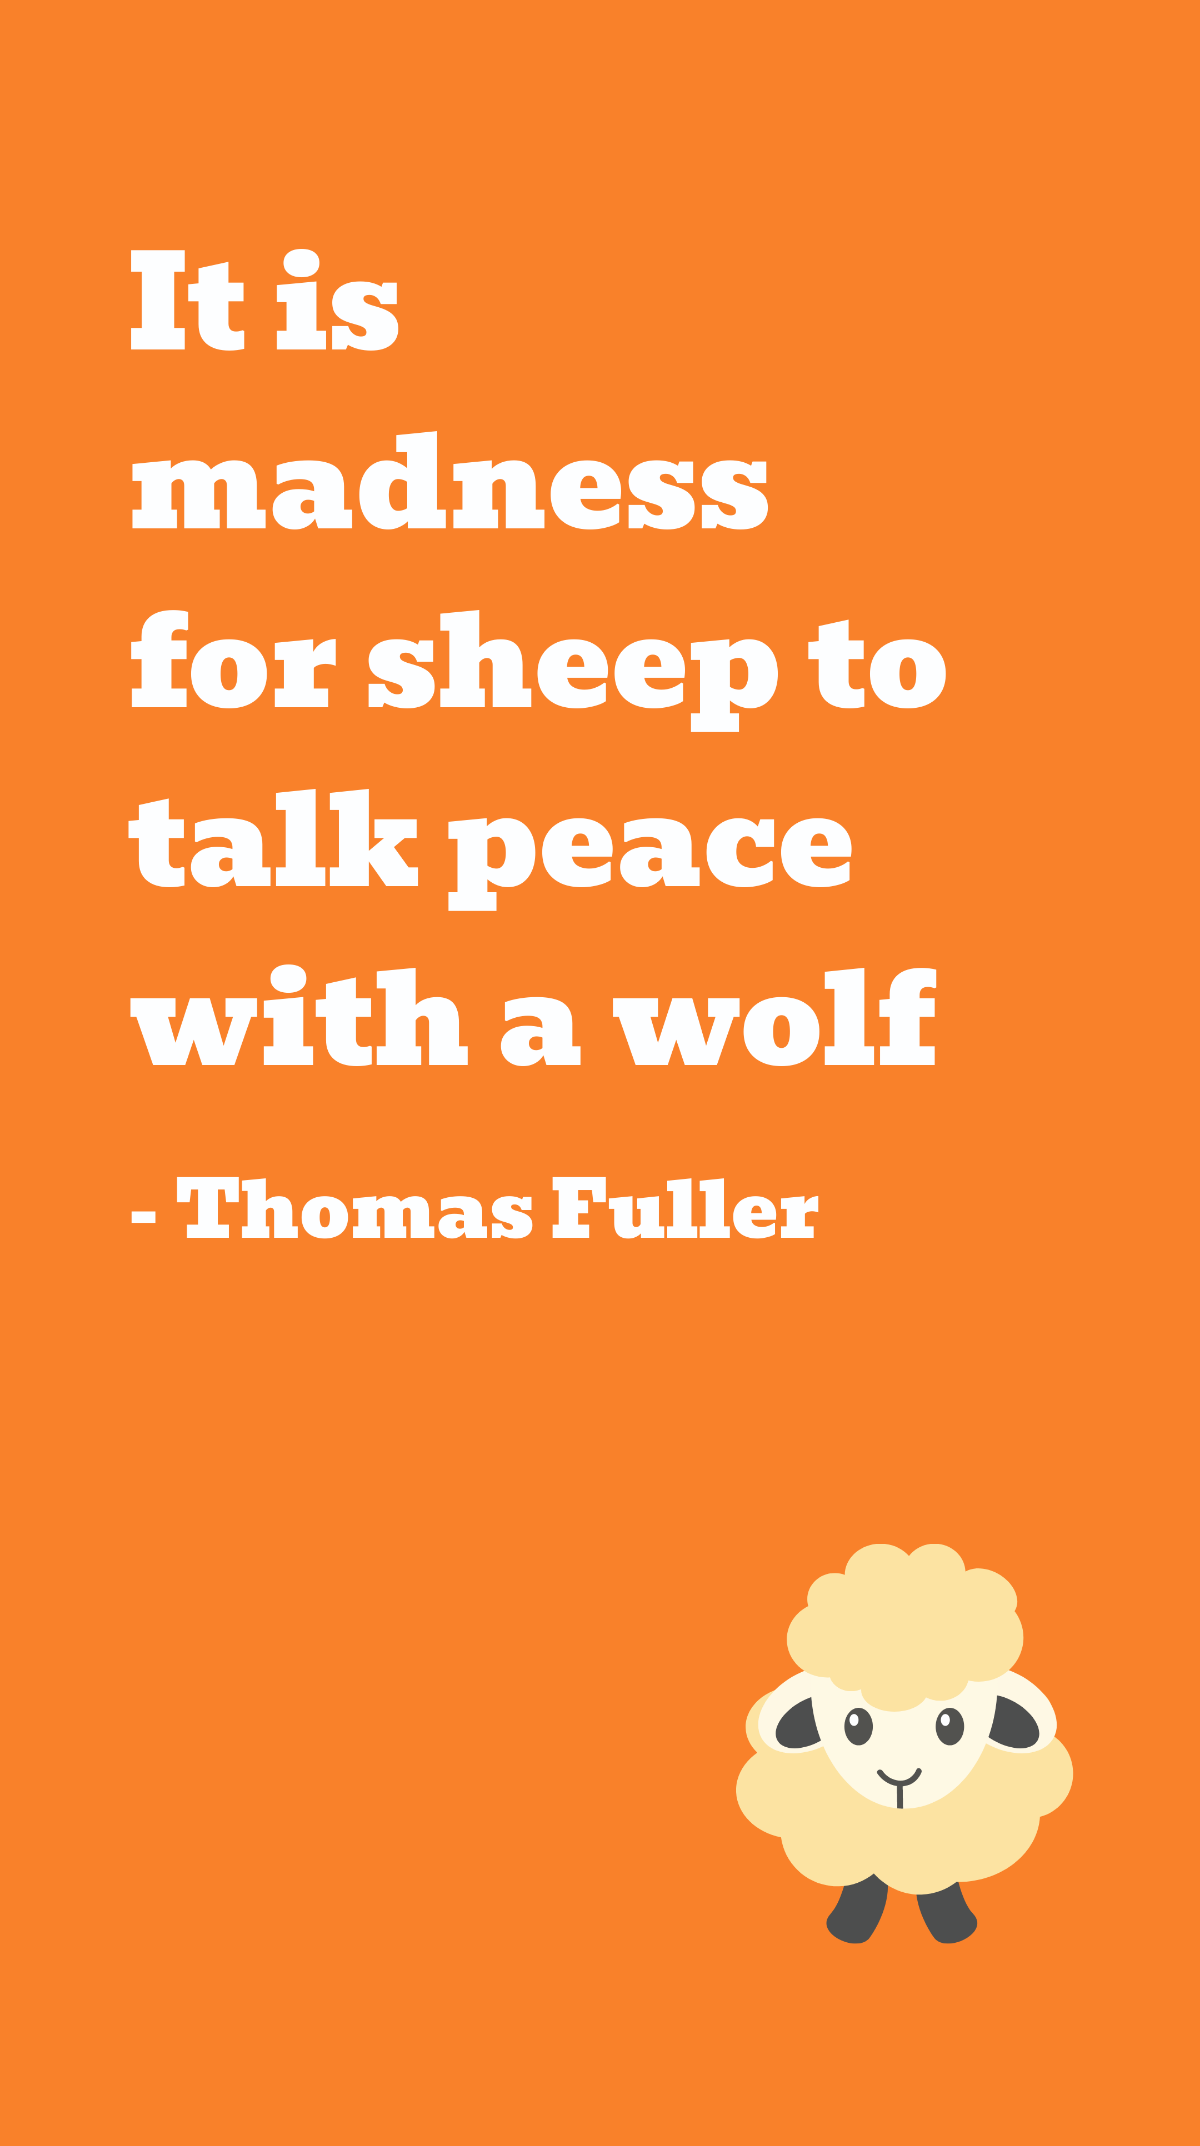 Thomas Fuller - It is madness for sheep to talk peace with a wolf Template